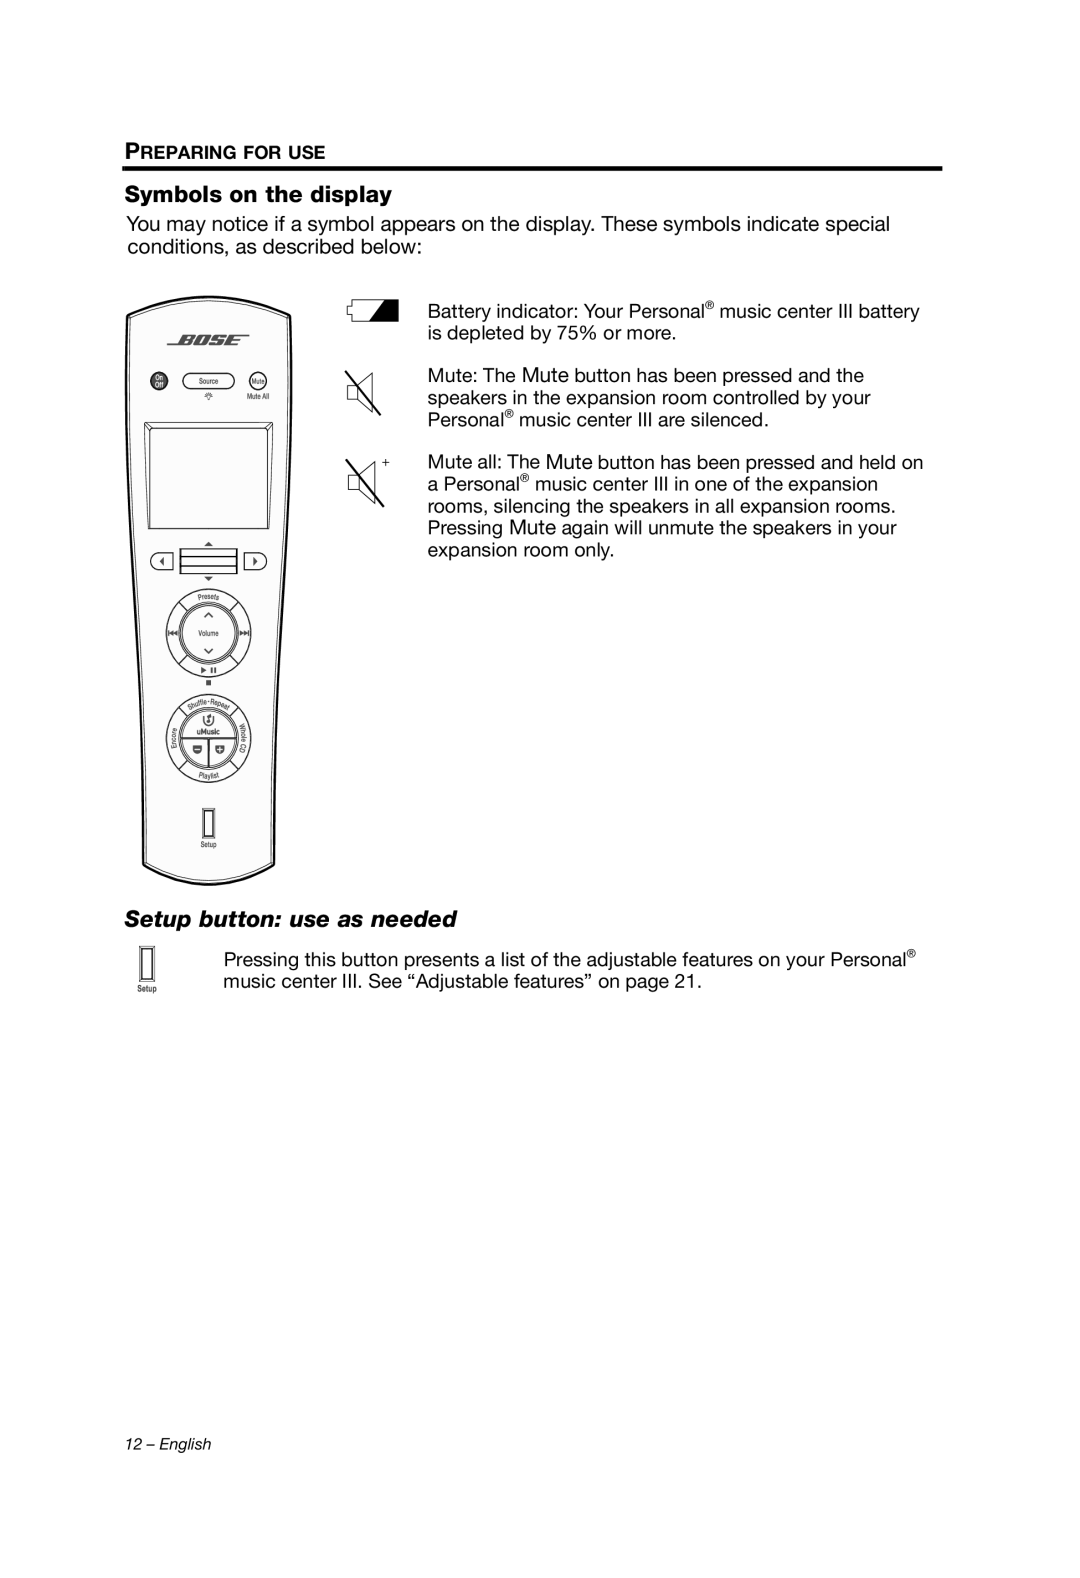 Bose PMCIII, Personal Music Center III manual Symbols on the display, Setup button use as needed, Preparing For Use 